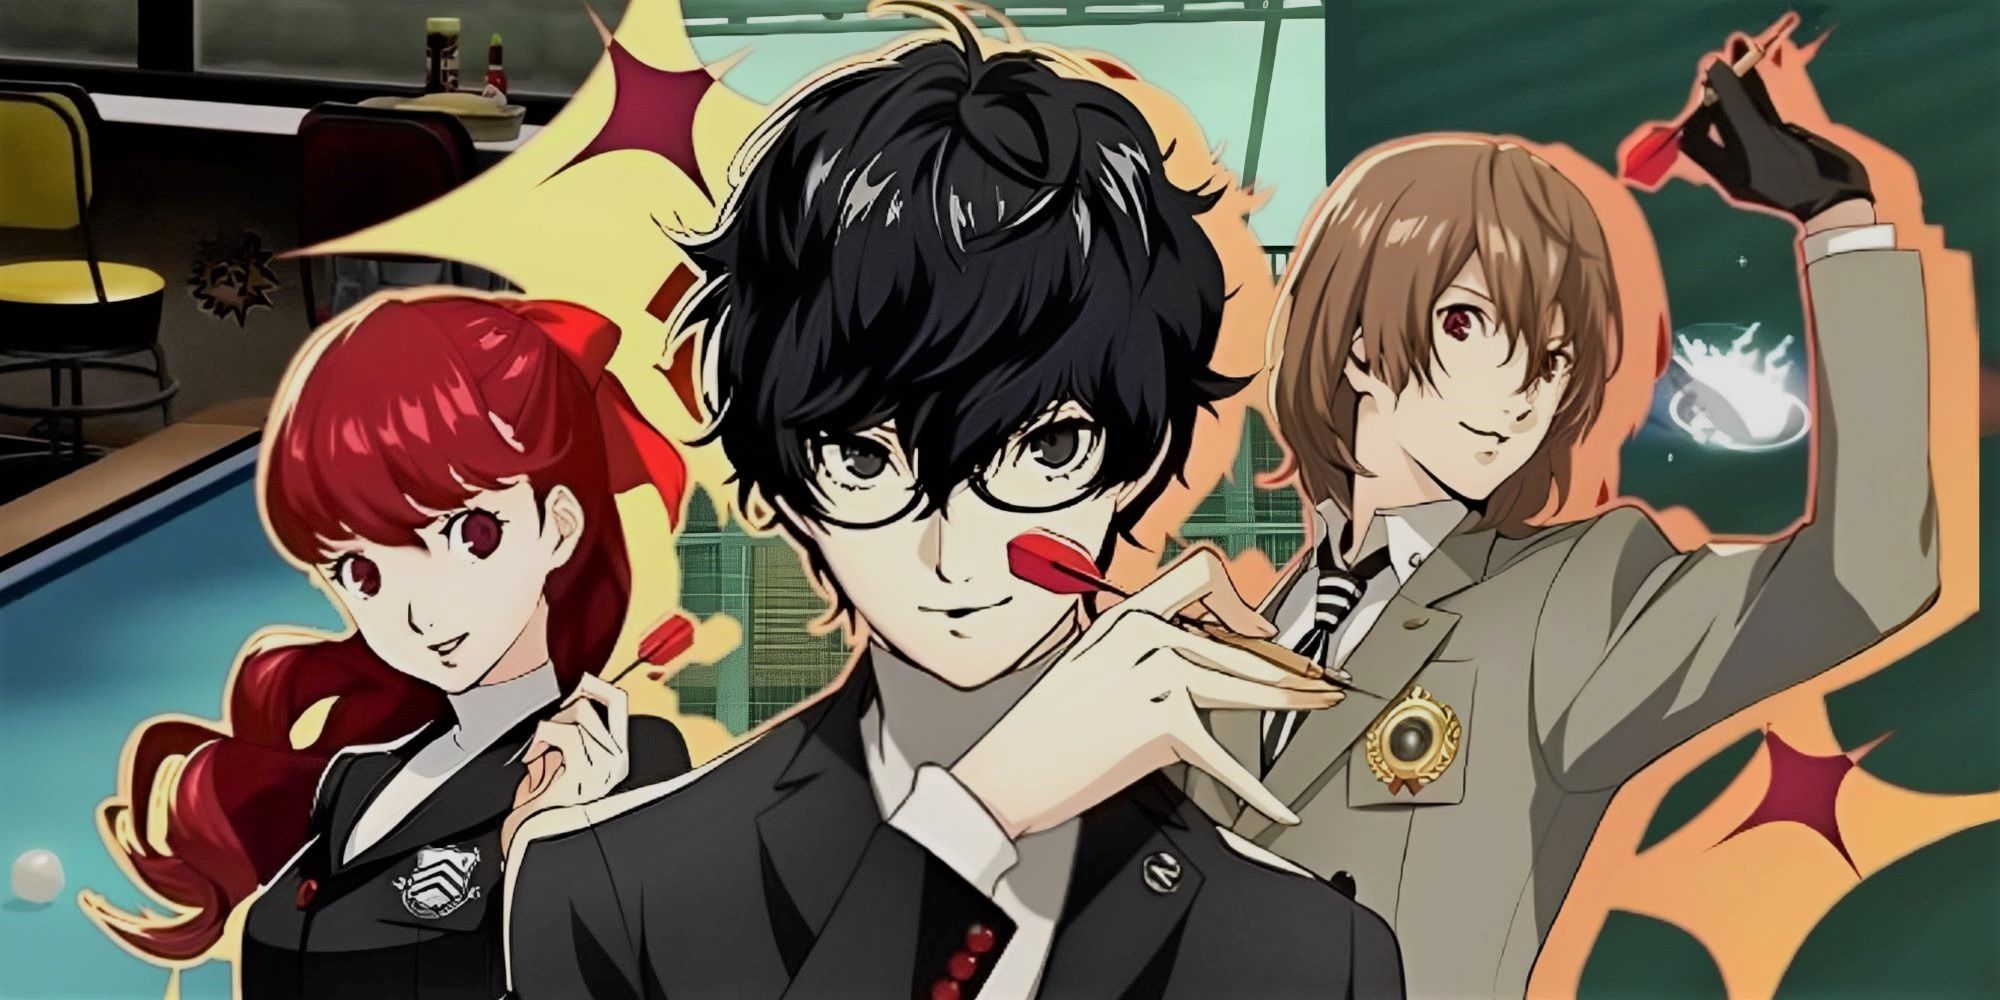 Yoshizawa, Akechi, and Joker from Persona 5 holding darts with images of billiards, batting cages, and fishing in the background